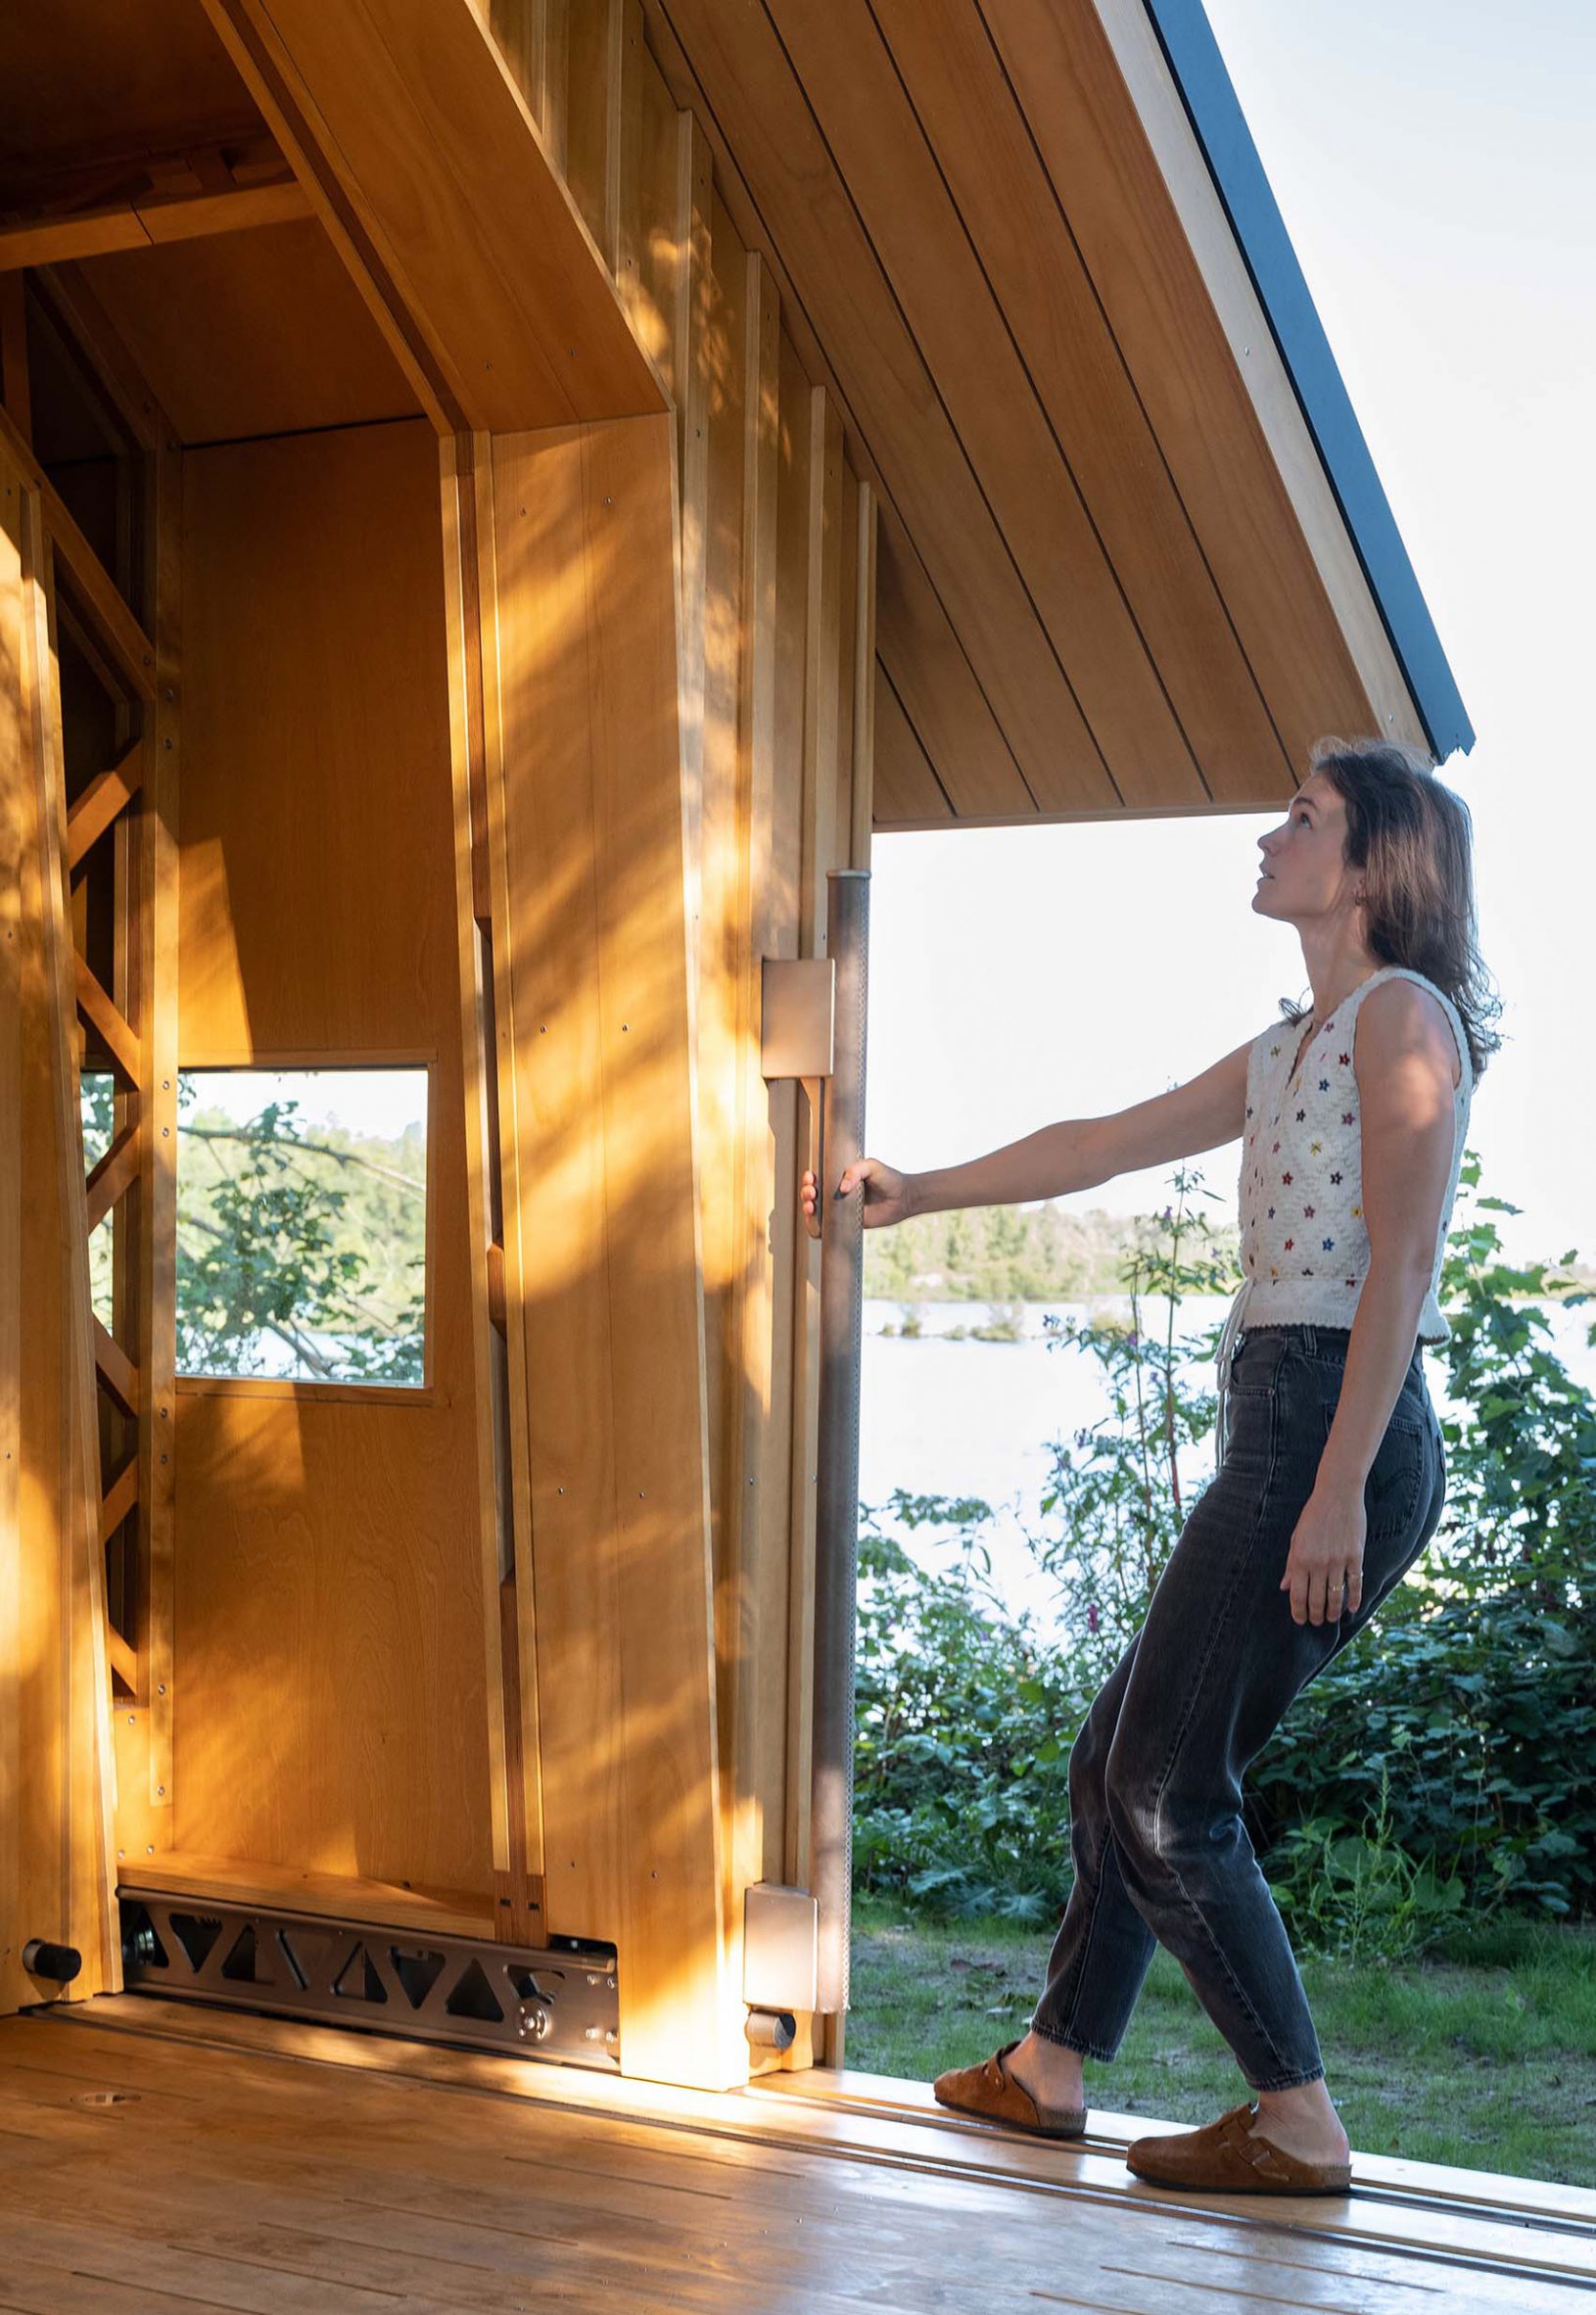 Woman sliding walls of Cabin Anna in the Netherlands by Caspar Schols